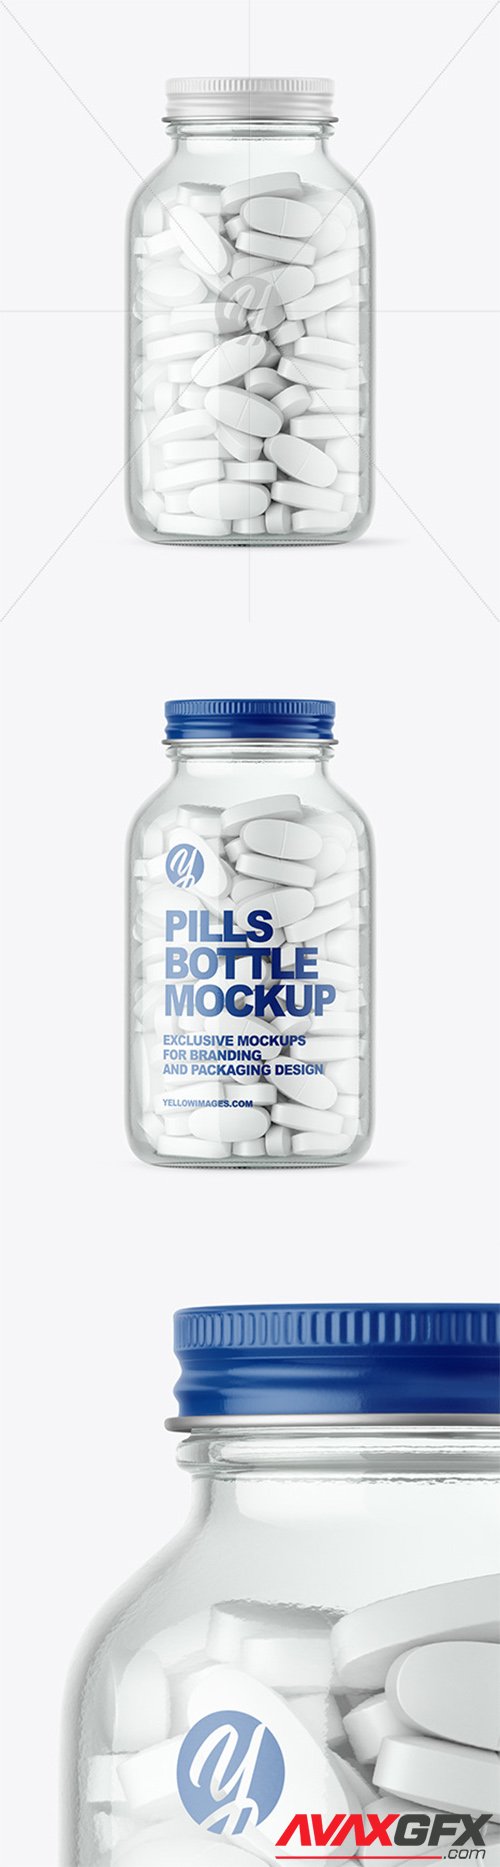 Download Clear Glass Pills Bottle Mockup 60907 Tif Avaxgfx All Downloads That You Need In One Place Graphic From Nitroflare Rapidgator Yellowimages Mockups